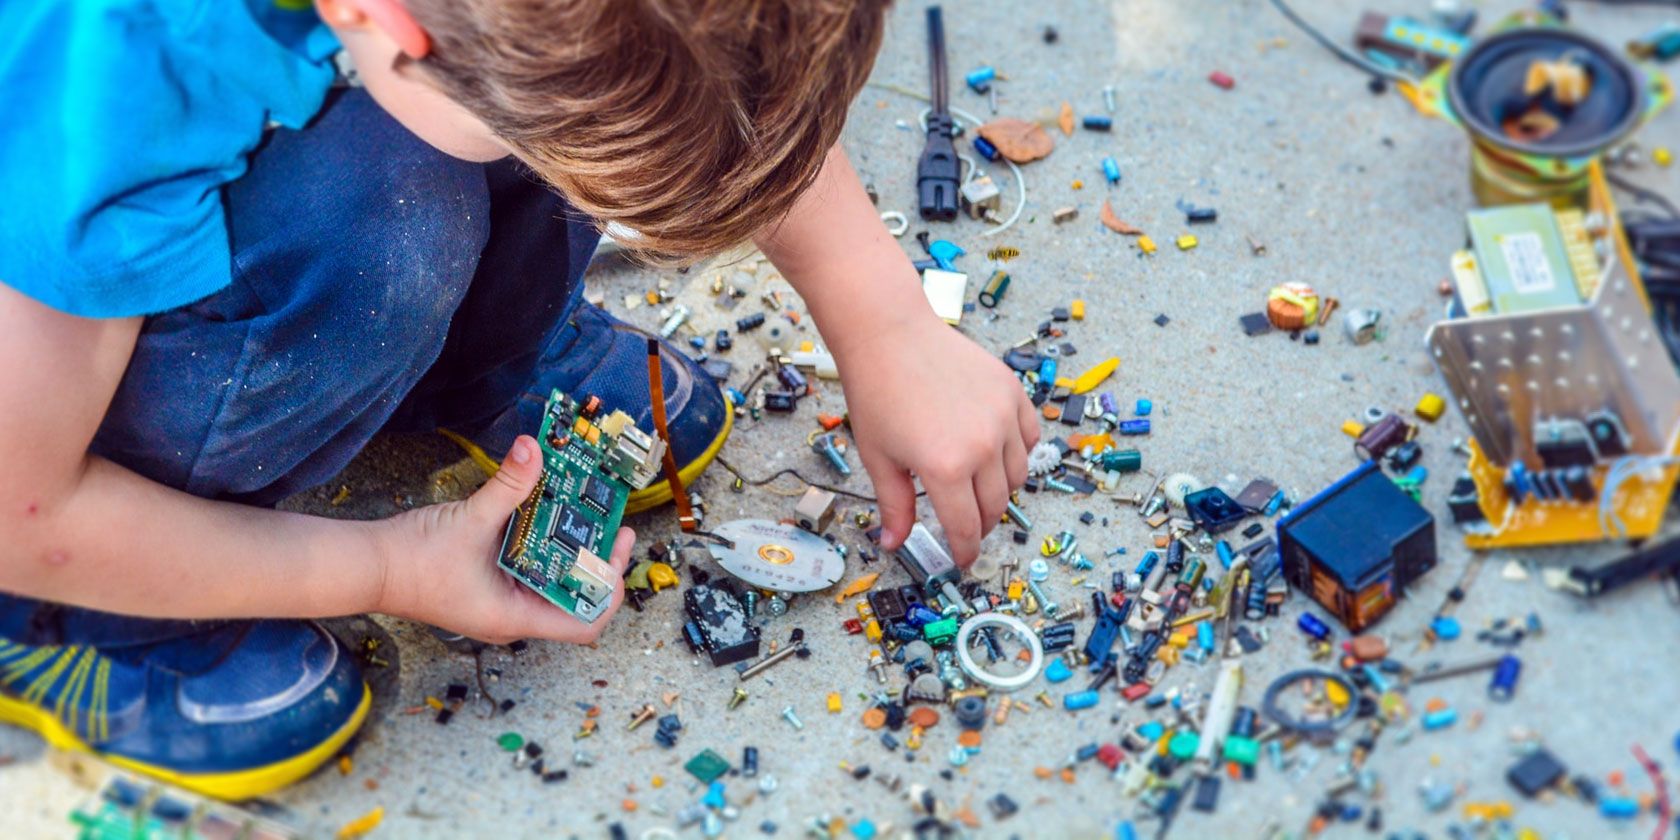 The 5 Best Electronics Kits for Kids MakeUseOf